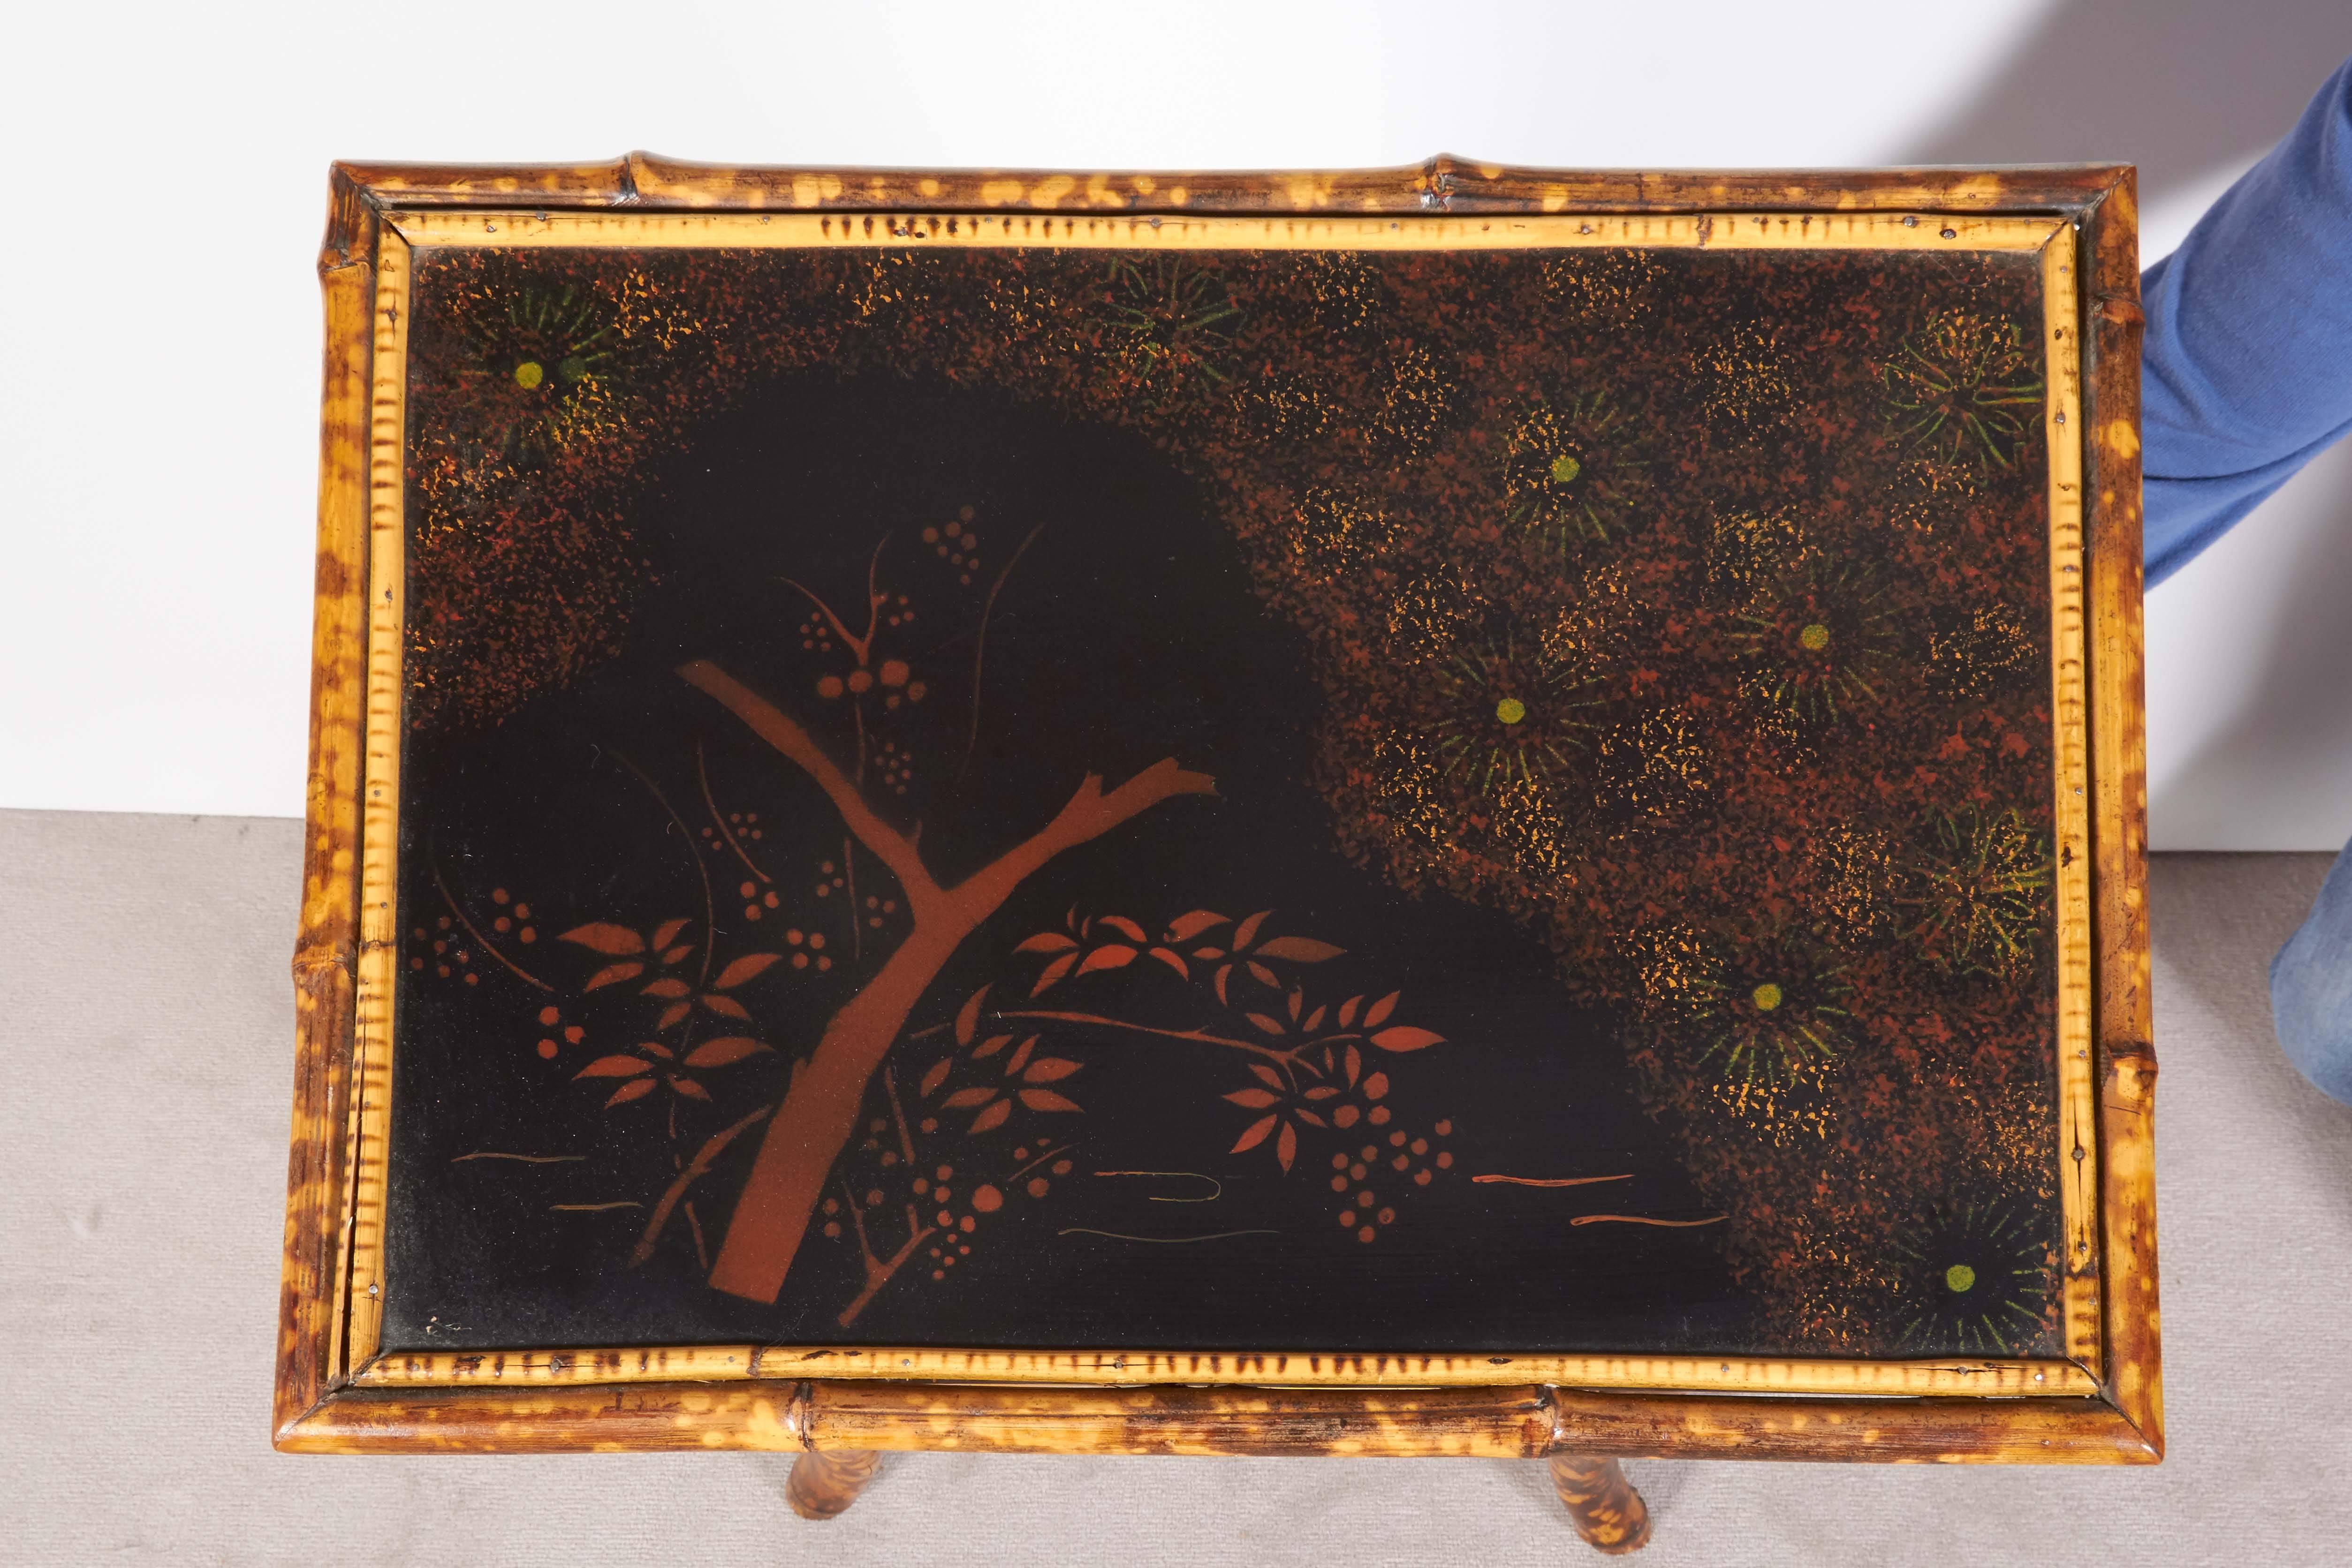 Victorian late 19th century Anglo-Japanese style serving table, the top, lower shelf and four drop leaves in black lacquer with hand-painted floral designs, against tortoiseshell bamboo frame. Very good antique condition, including age appropriate